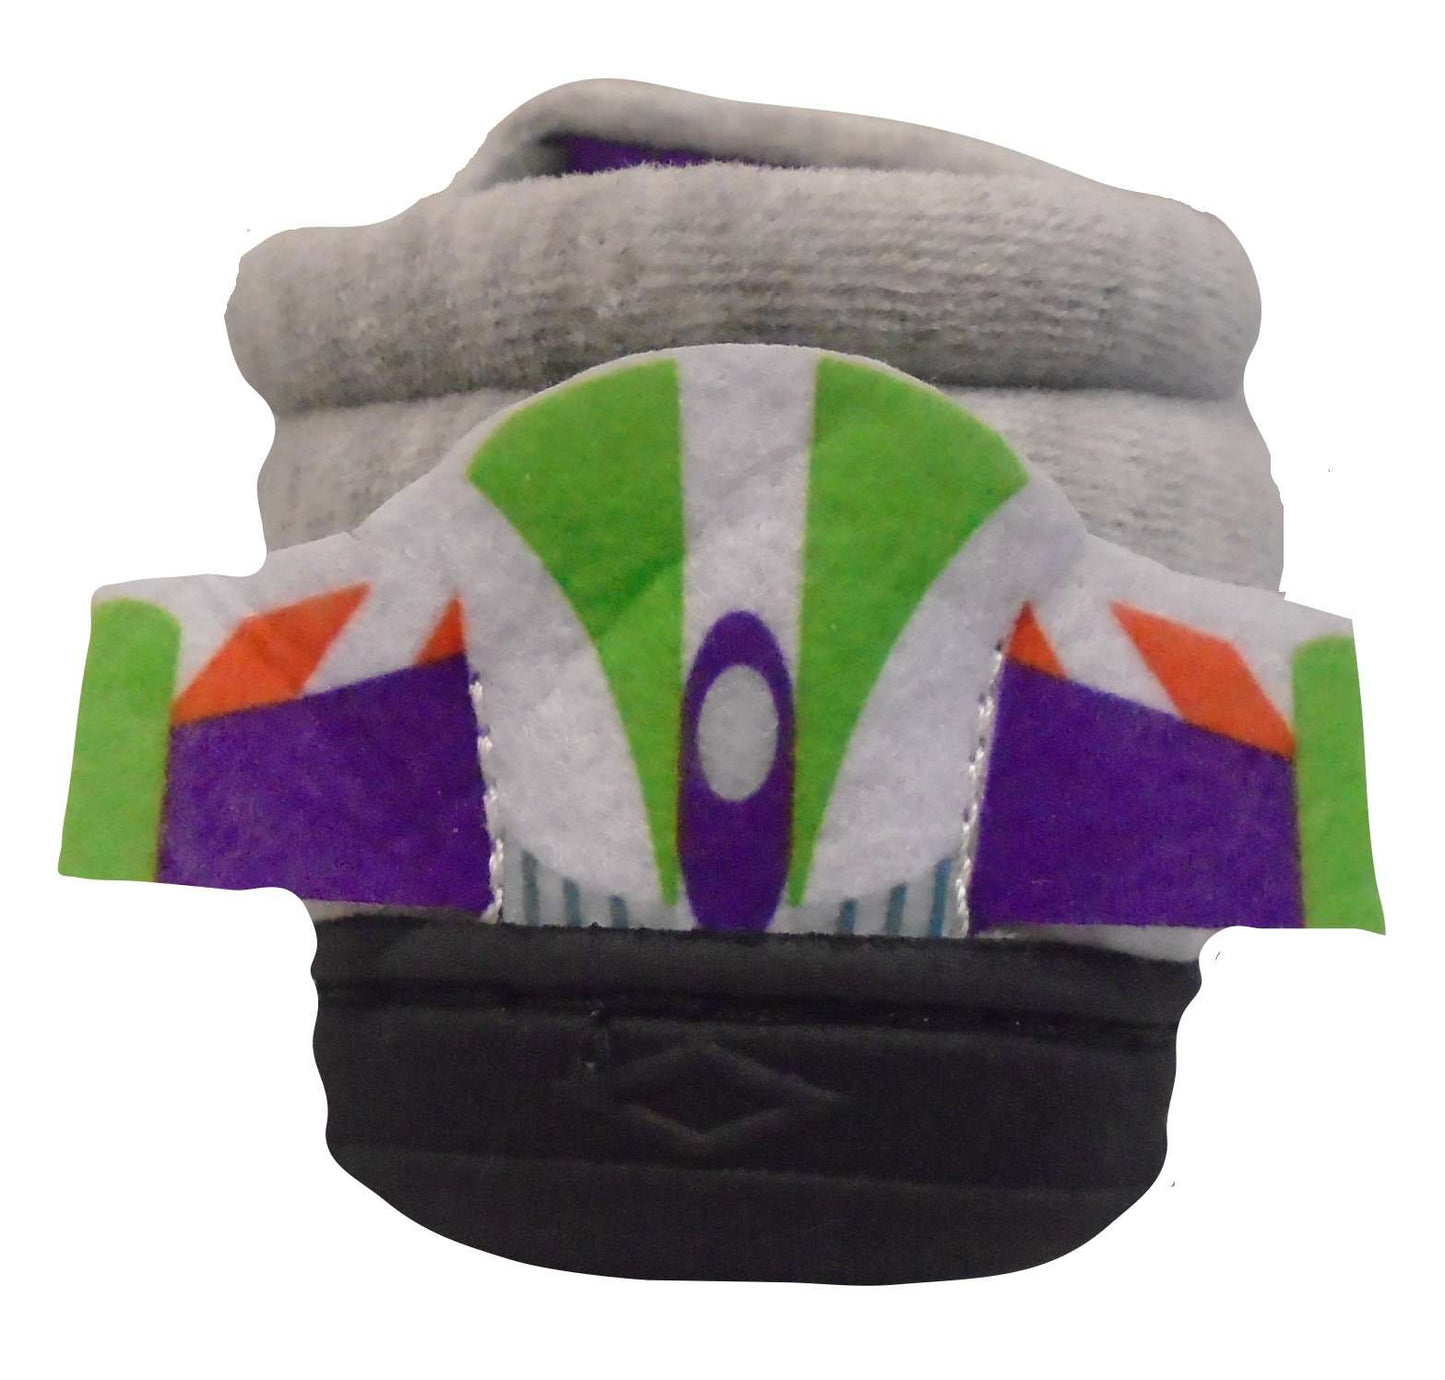 Disney Toy Story "Buzz Lightyear" Boys Slippers with Adjustable Strap